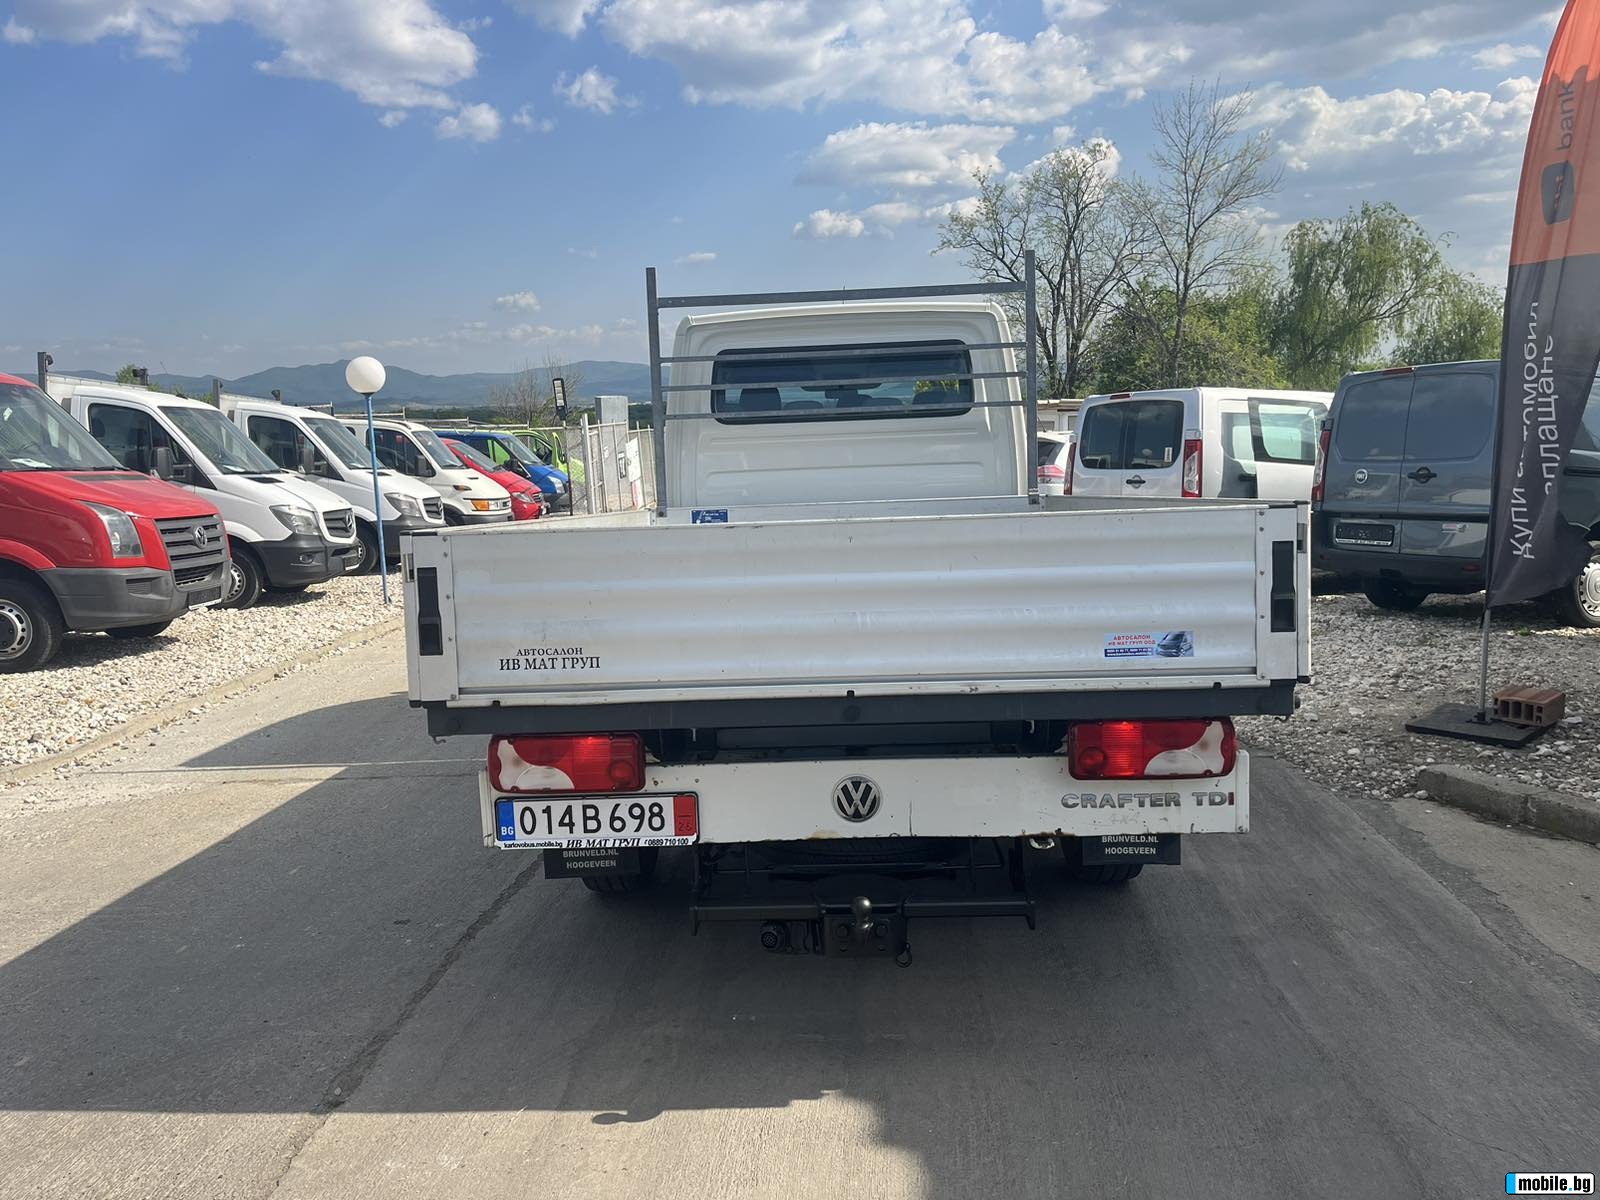 VW Crafter 7,3.45 EURO5 | Mobile.bg   5